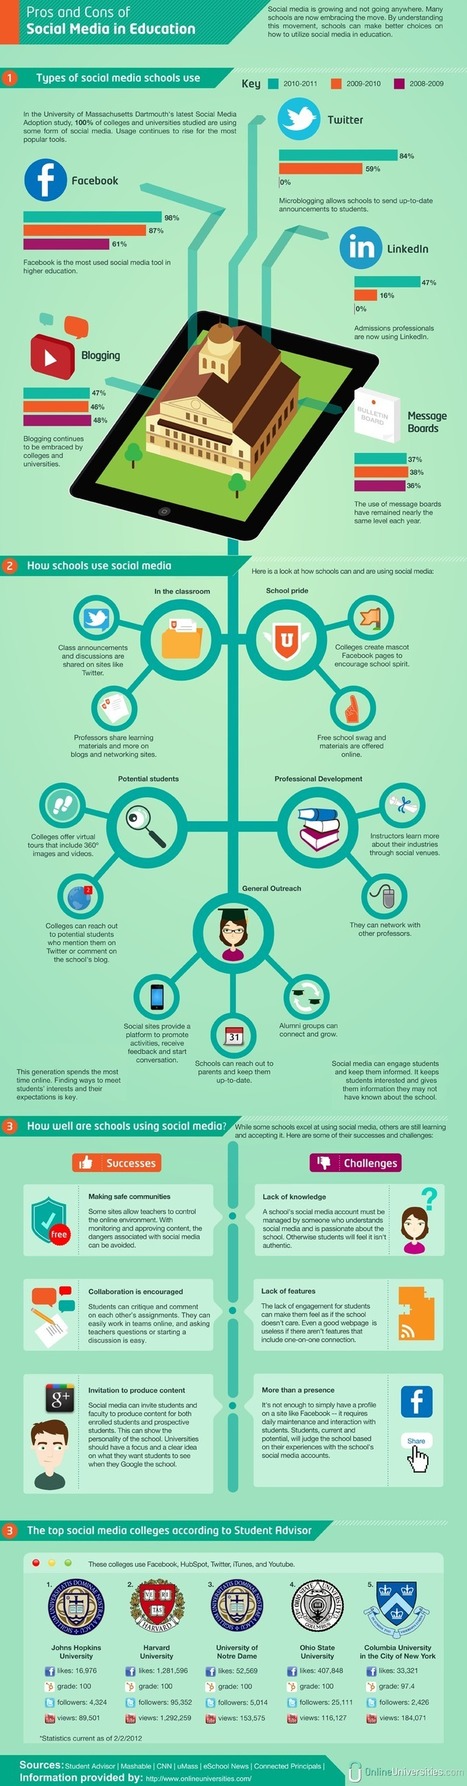 Pros and Cons of Social Media in Education, INFOGRAPHIC > | :: The 4th Era :: | Scoop.it